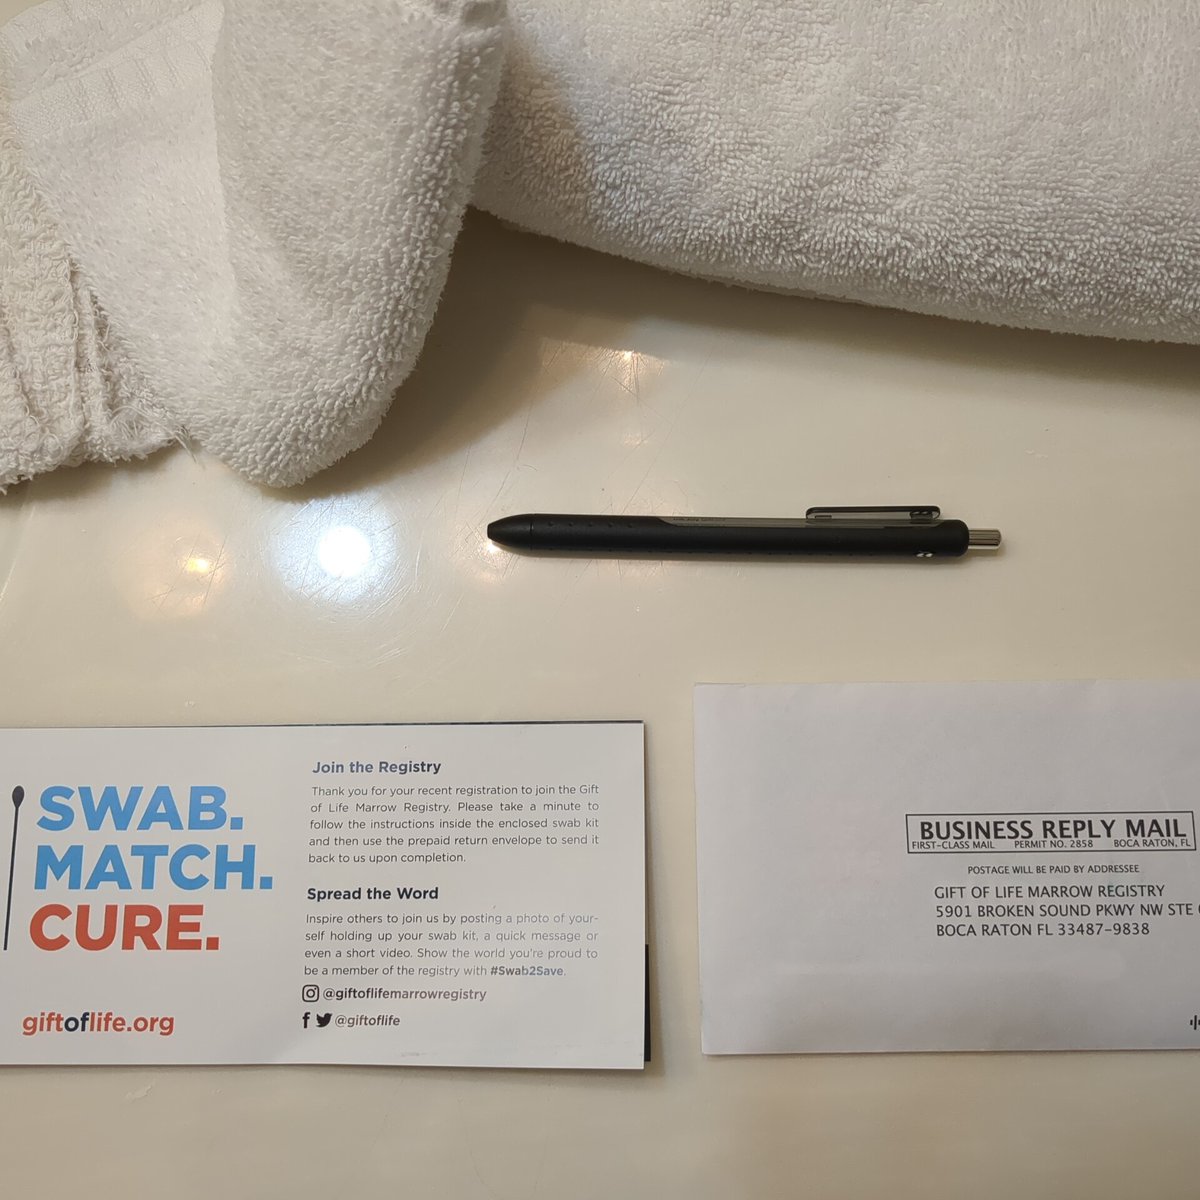 Sending these in! #Swab2Save Thank you @GiftofLife marrow registry Go to giftoflife.org to become a stem cell donor cause it's cool! :)